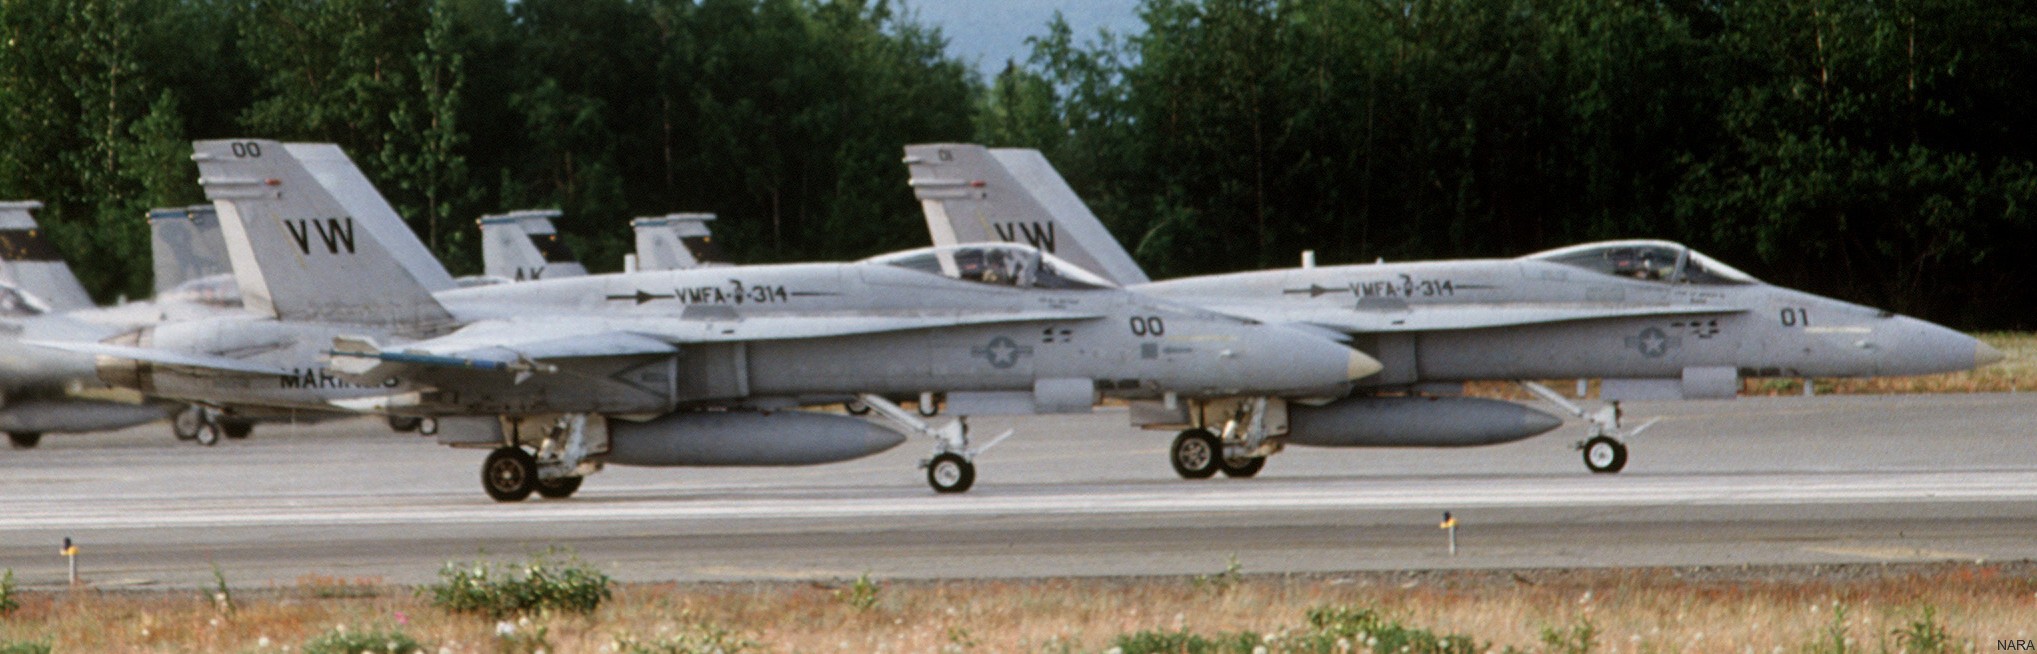 vmfa-314 black knights marine fighter attack squadron f/a-18a hornet exercise cope thunder elmendorf afb